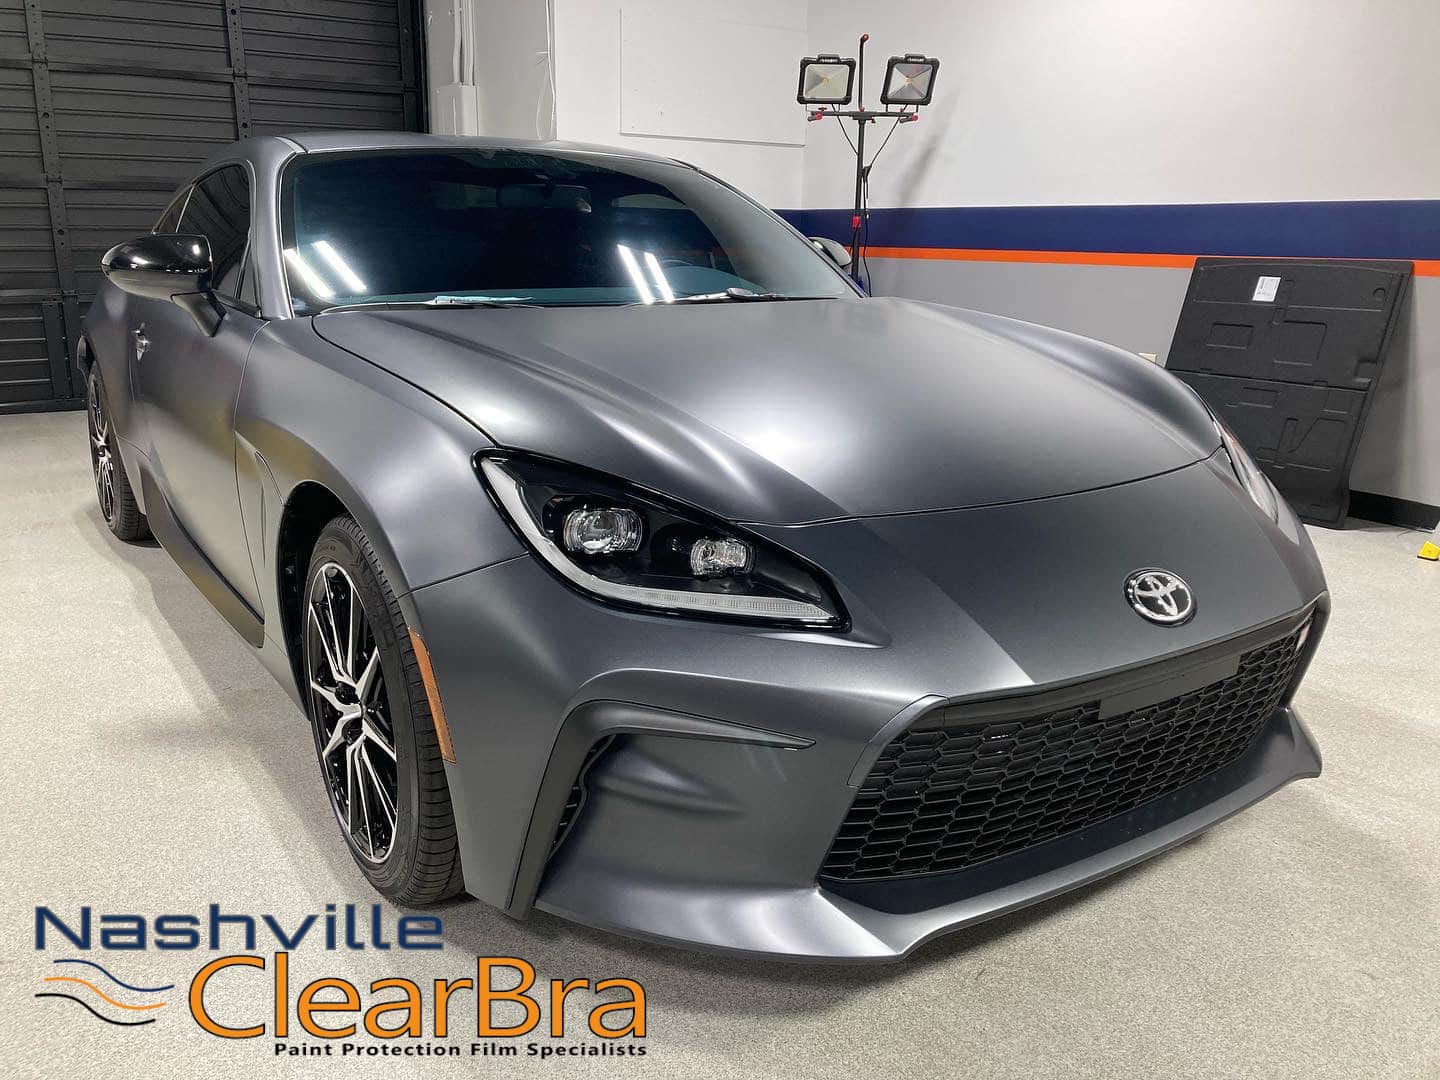 XPEL Clear Bra PPF Paint Protection Film Tint Ceramic Brentwood - Nashville  ClearBra